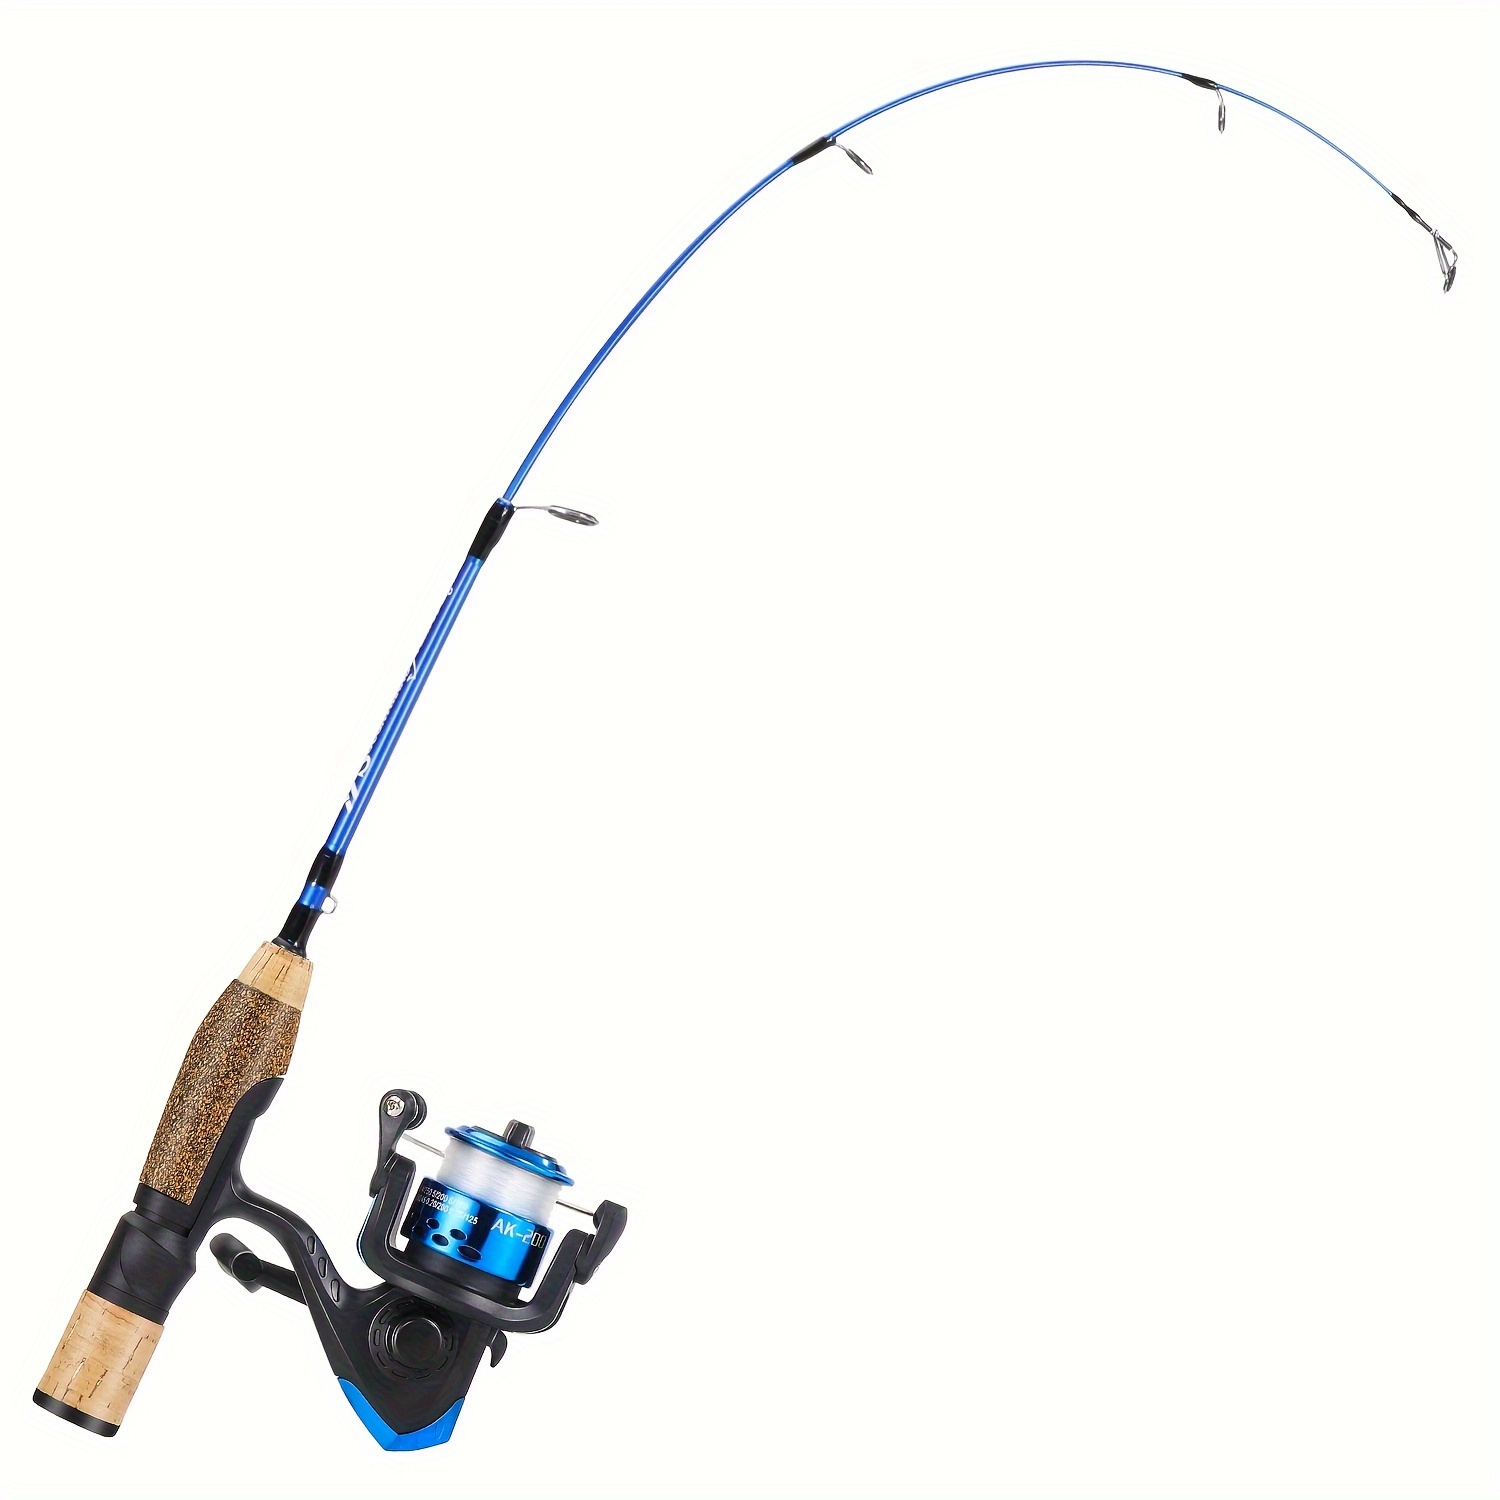 Sougayilang Ice Fishing Gear Set, Including 2 Sections Fiberglass M/L Power  Ice Fishing Rod, And 3BB Mini Spinning Reel With Fishing Line, Bait, Etc.